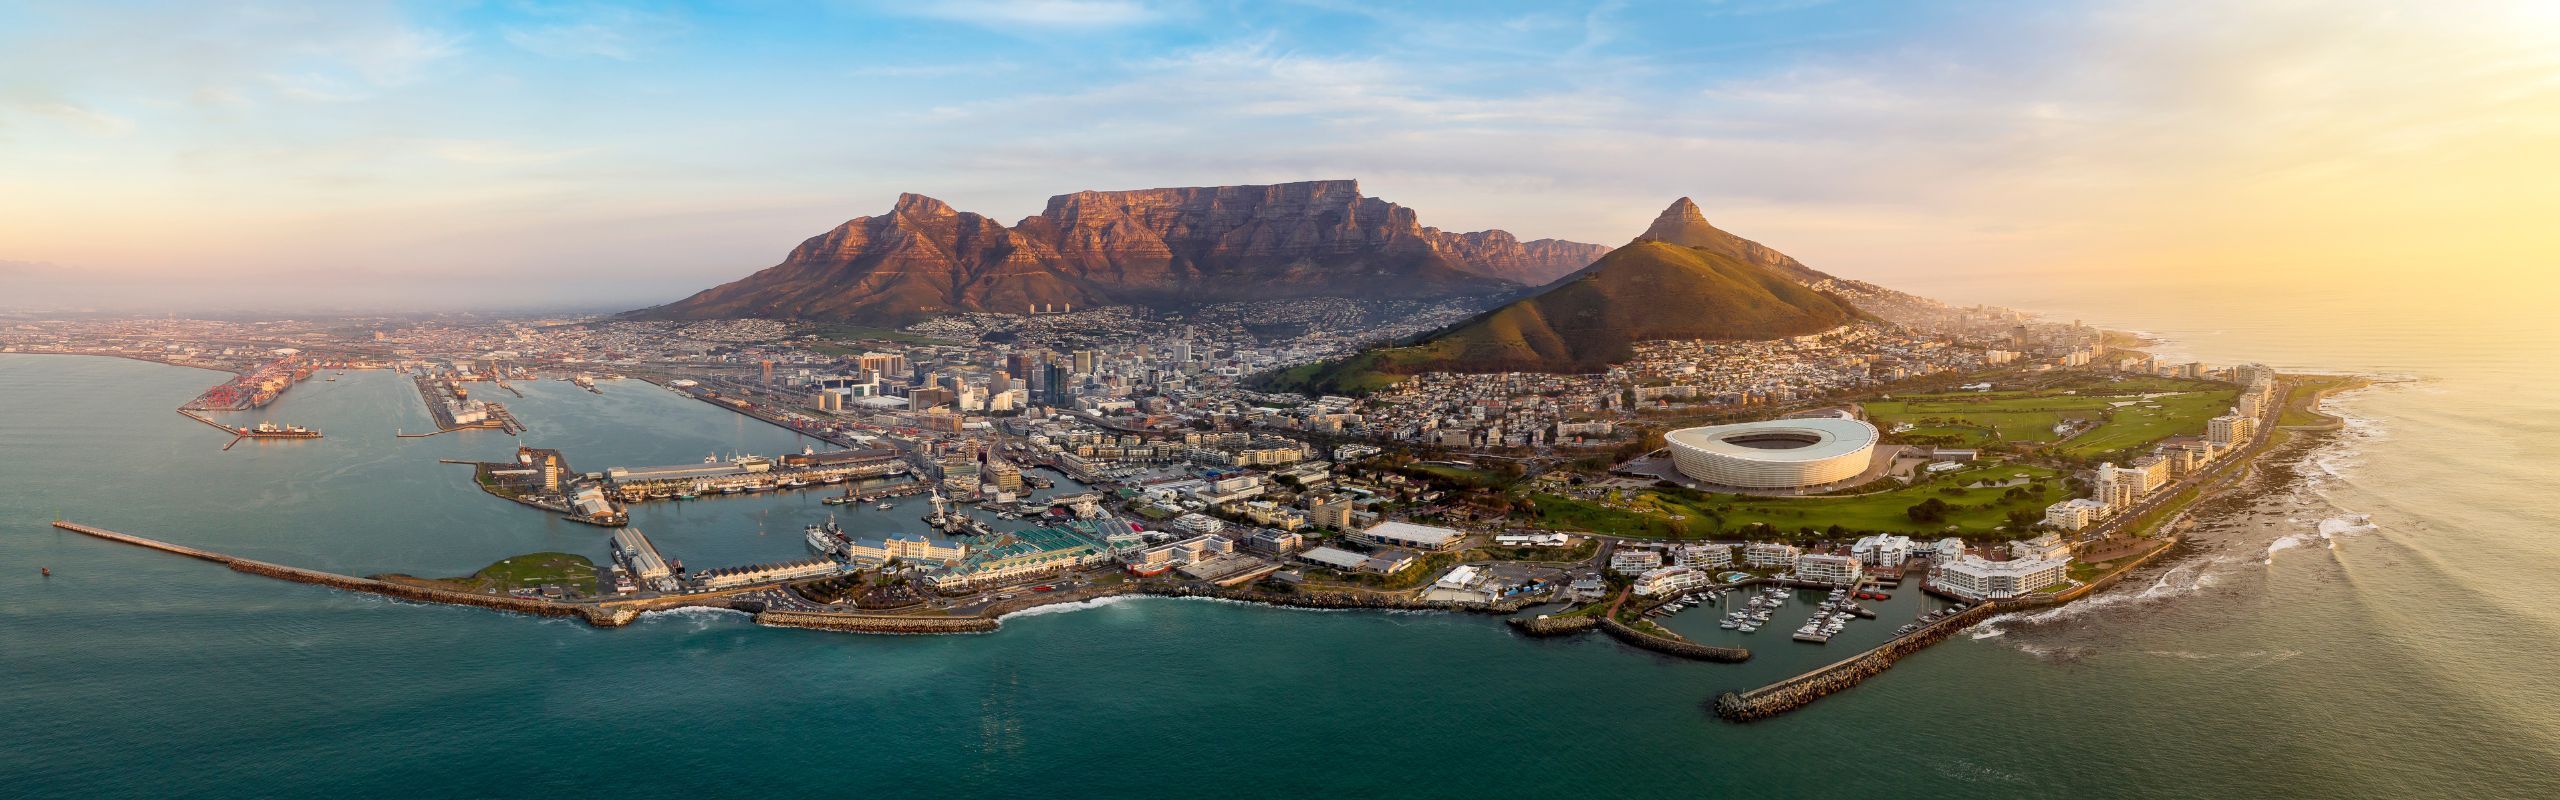 Image of Cape Town, South Africa as the sun begins to set